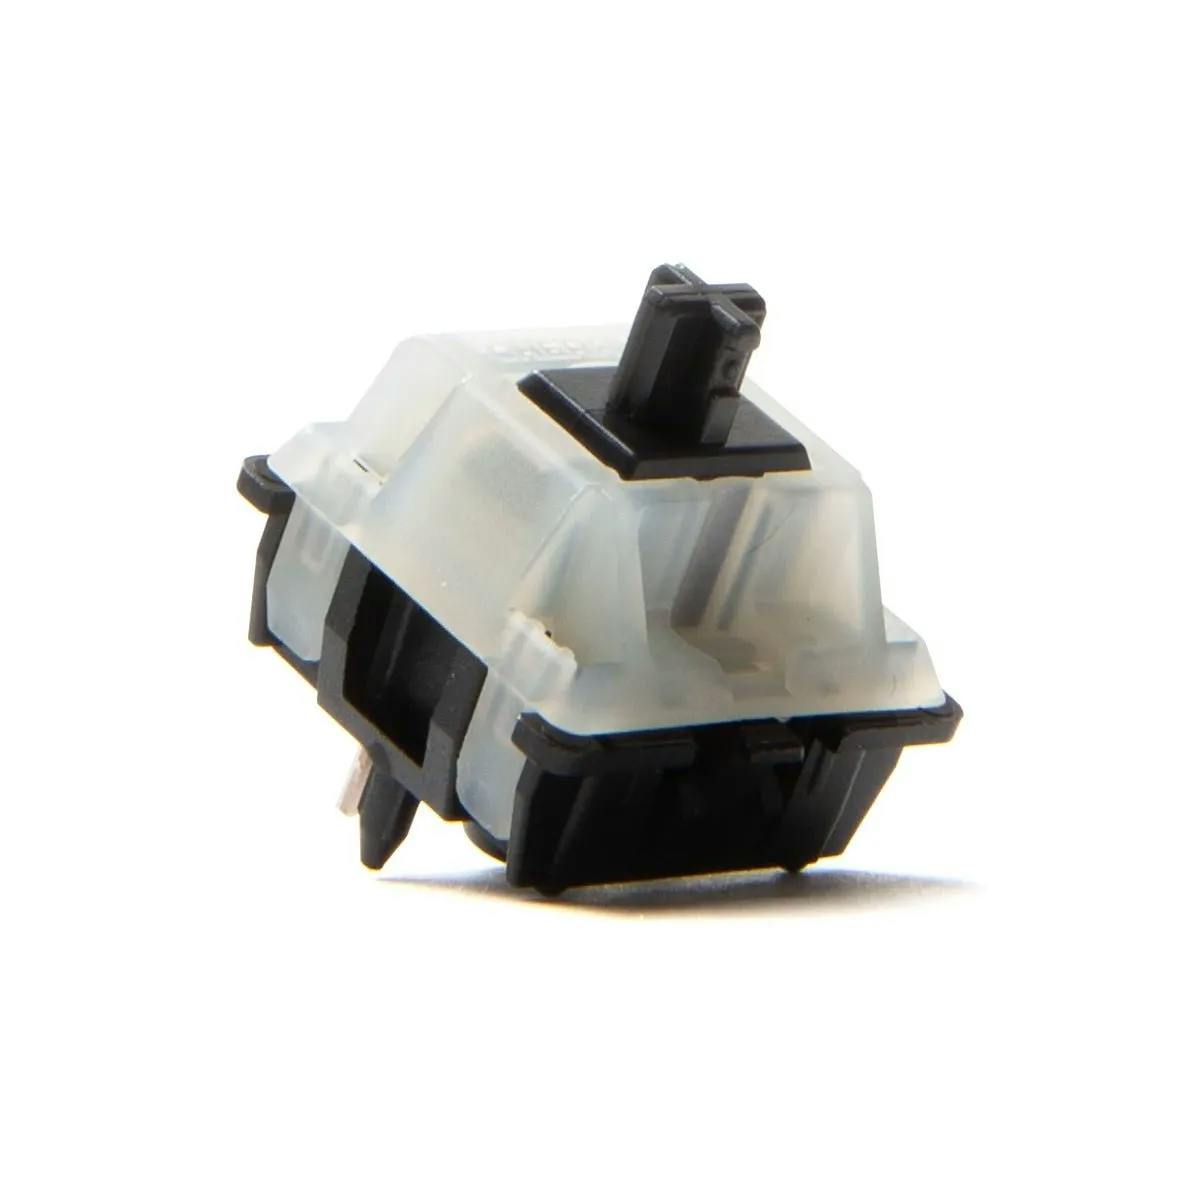 Image for Cherry MX Black Clear-Top "Nixie" Linear Switches